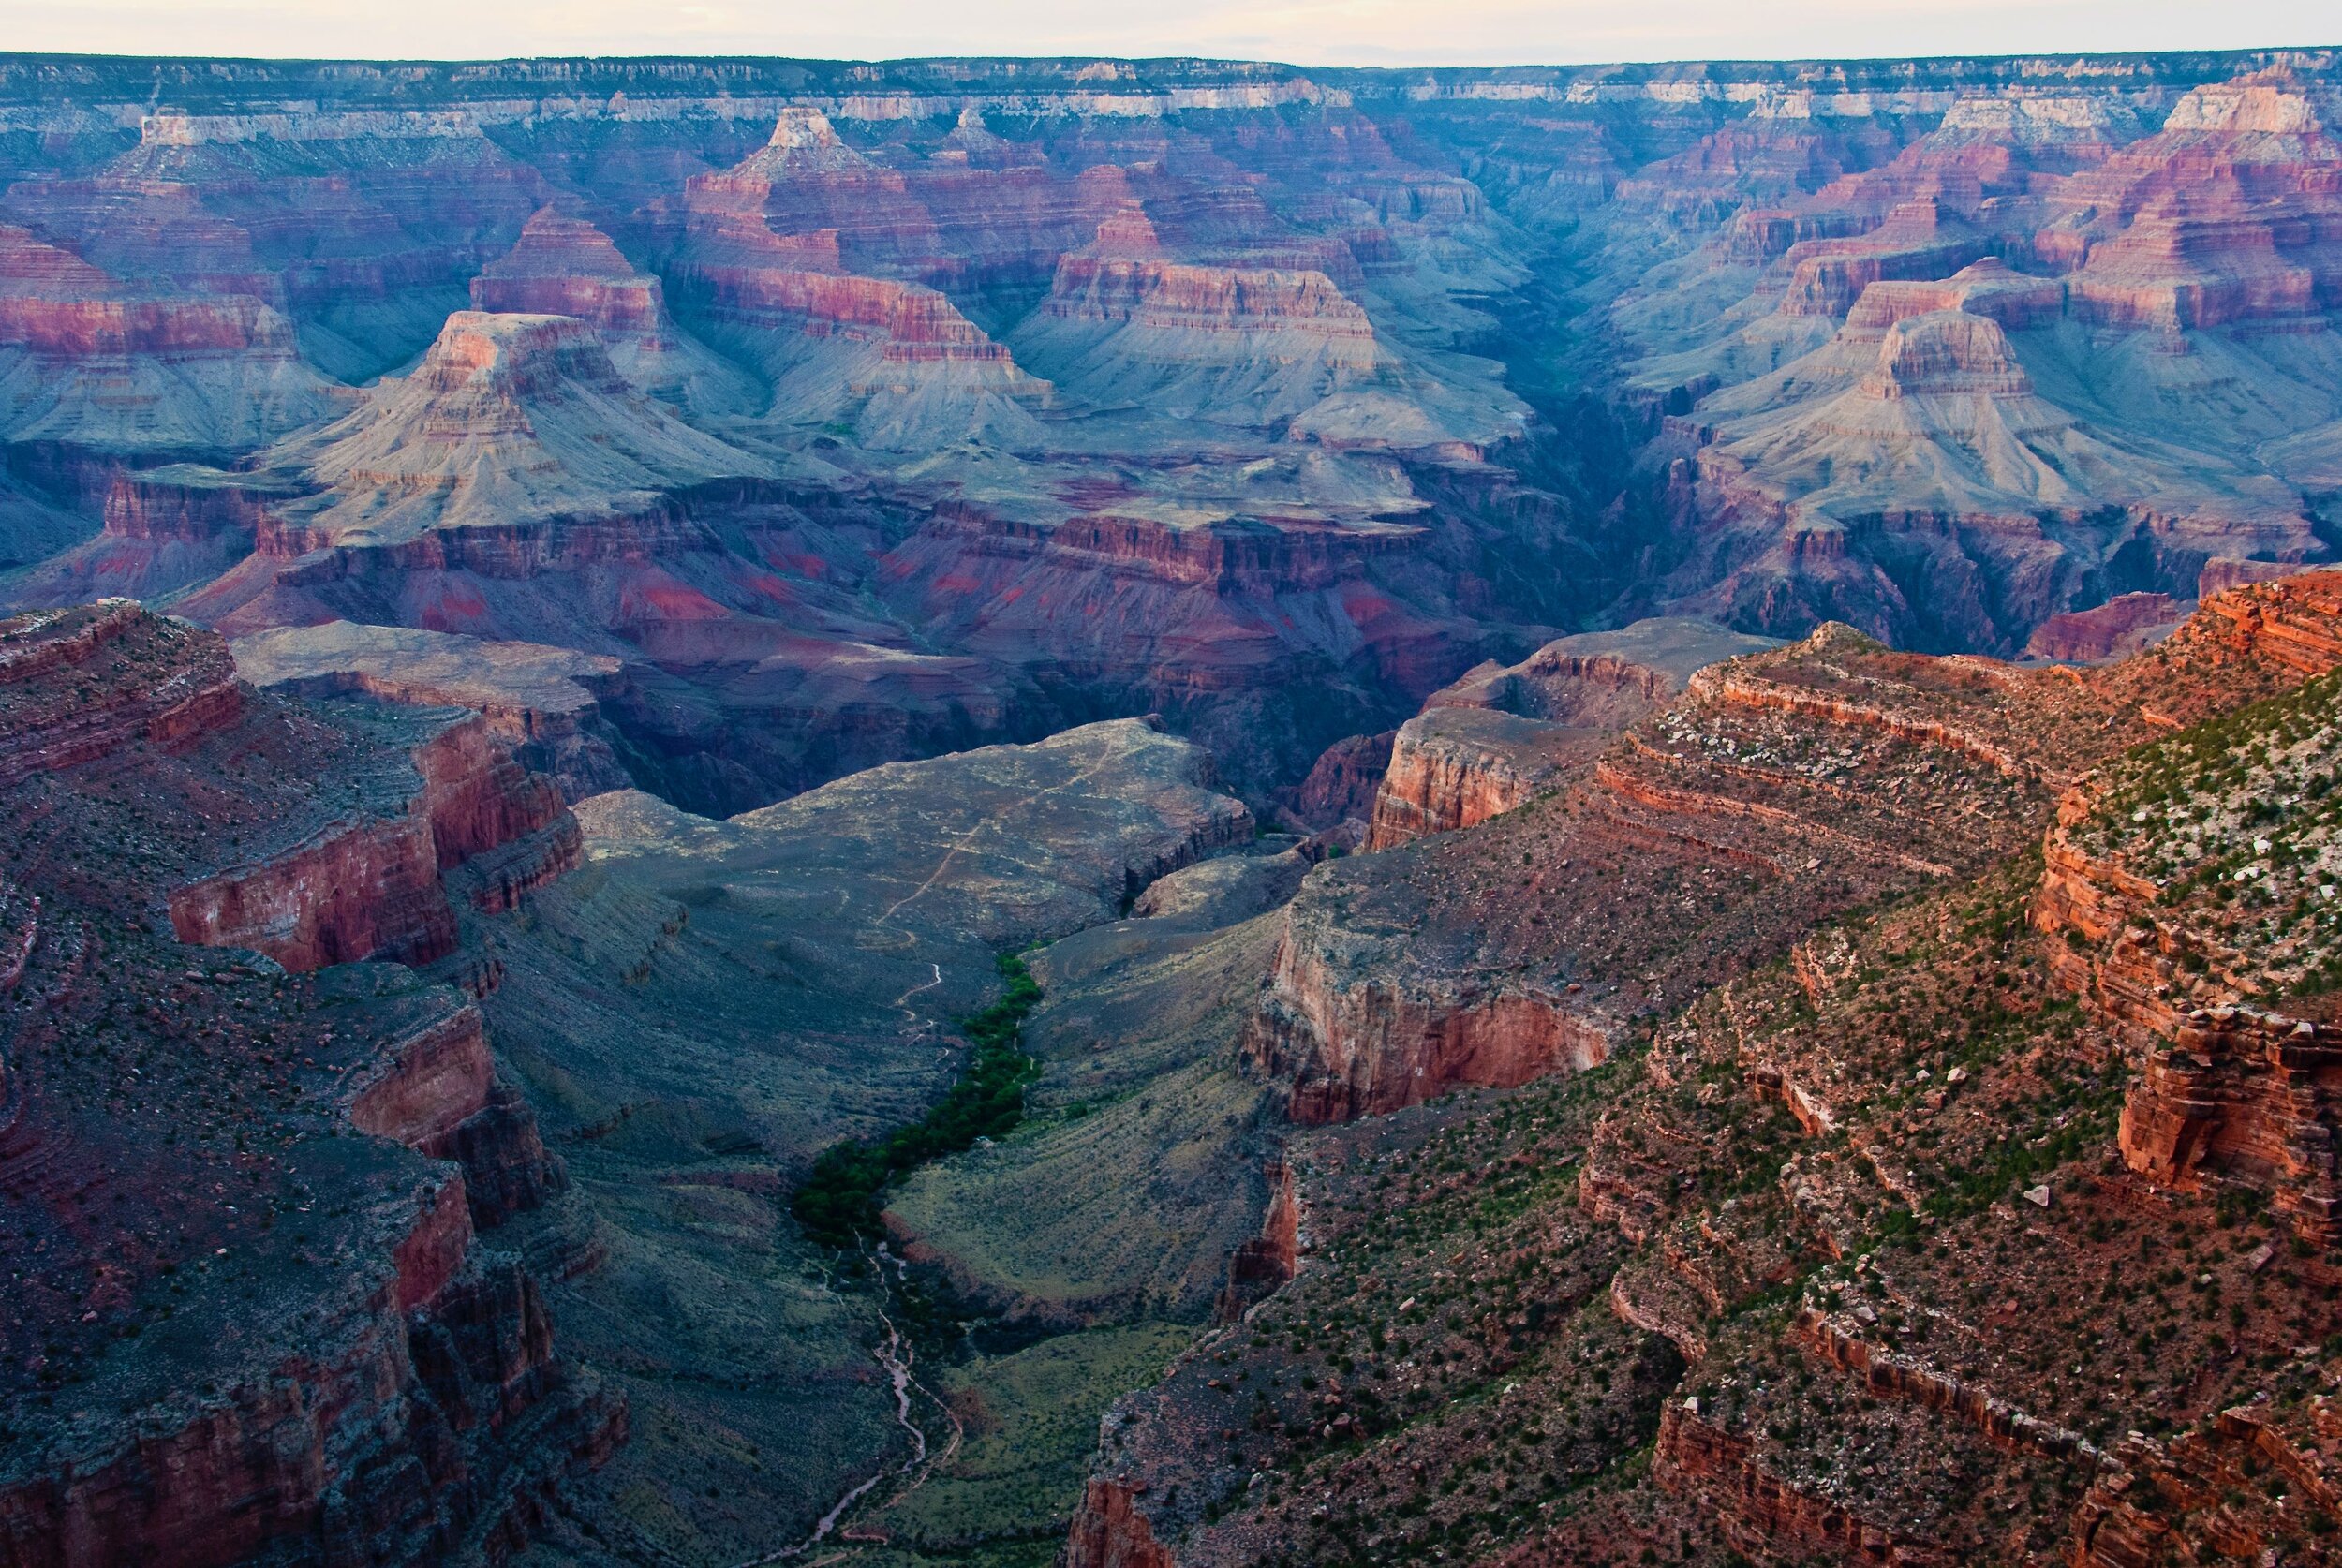 20140515-105-0000 - Grand Canyon National Park - Sunset at Bright Angel Point.jpeg